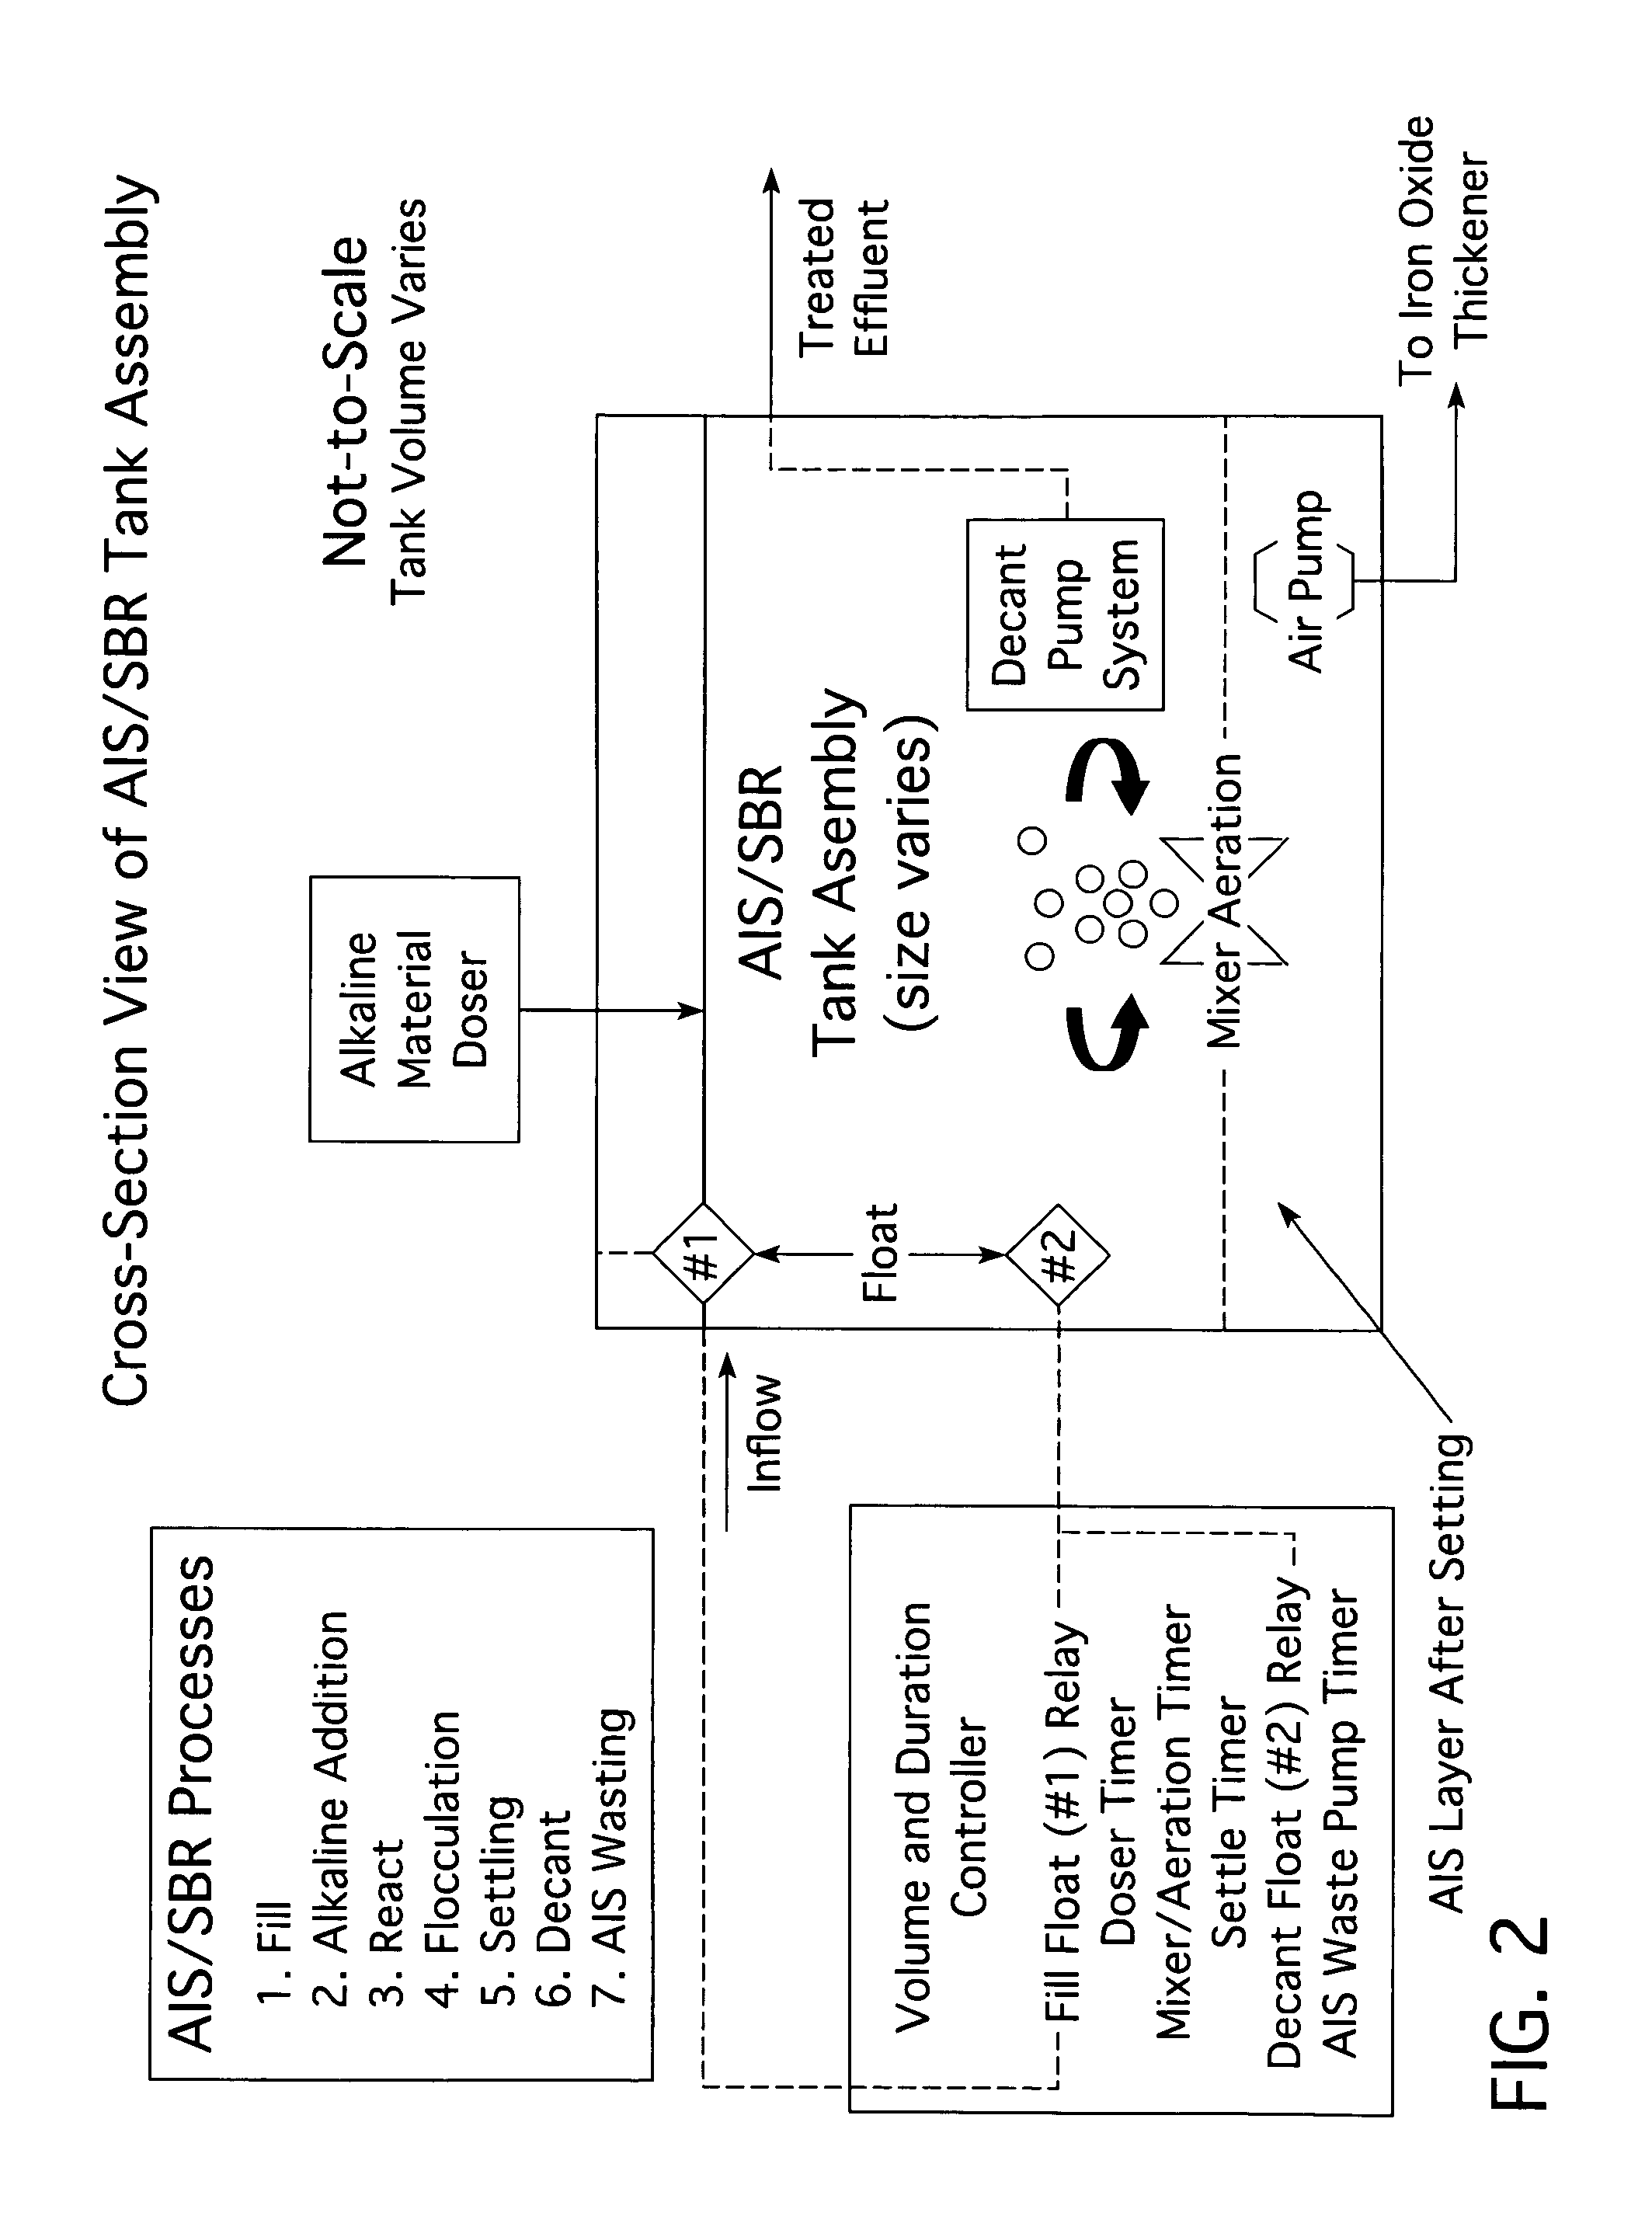 Treatment of iron contaminated liquids with an activated iron solids (AIS) process